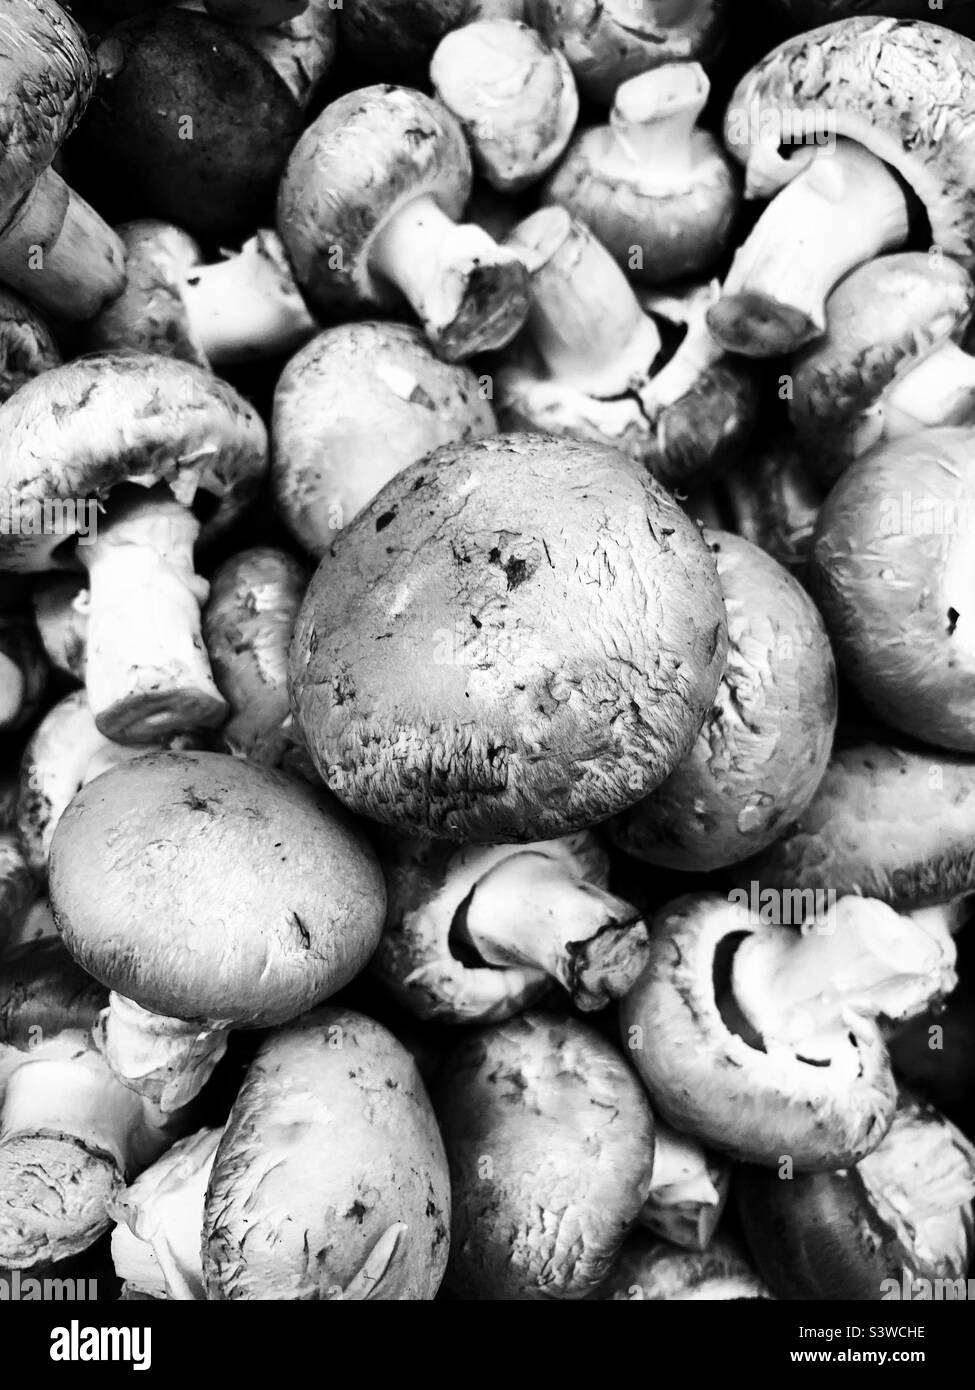 Delicious fresh white loose mushrooms for sale in the produce section in black and white monochrome. Stock Photo